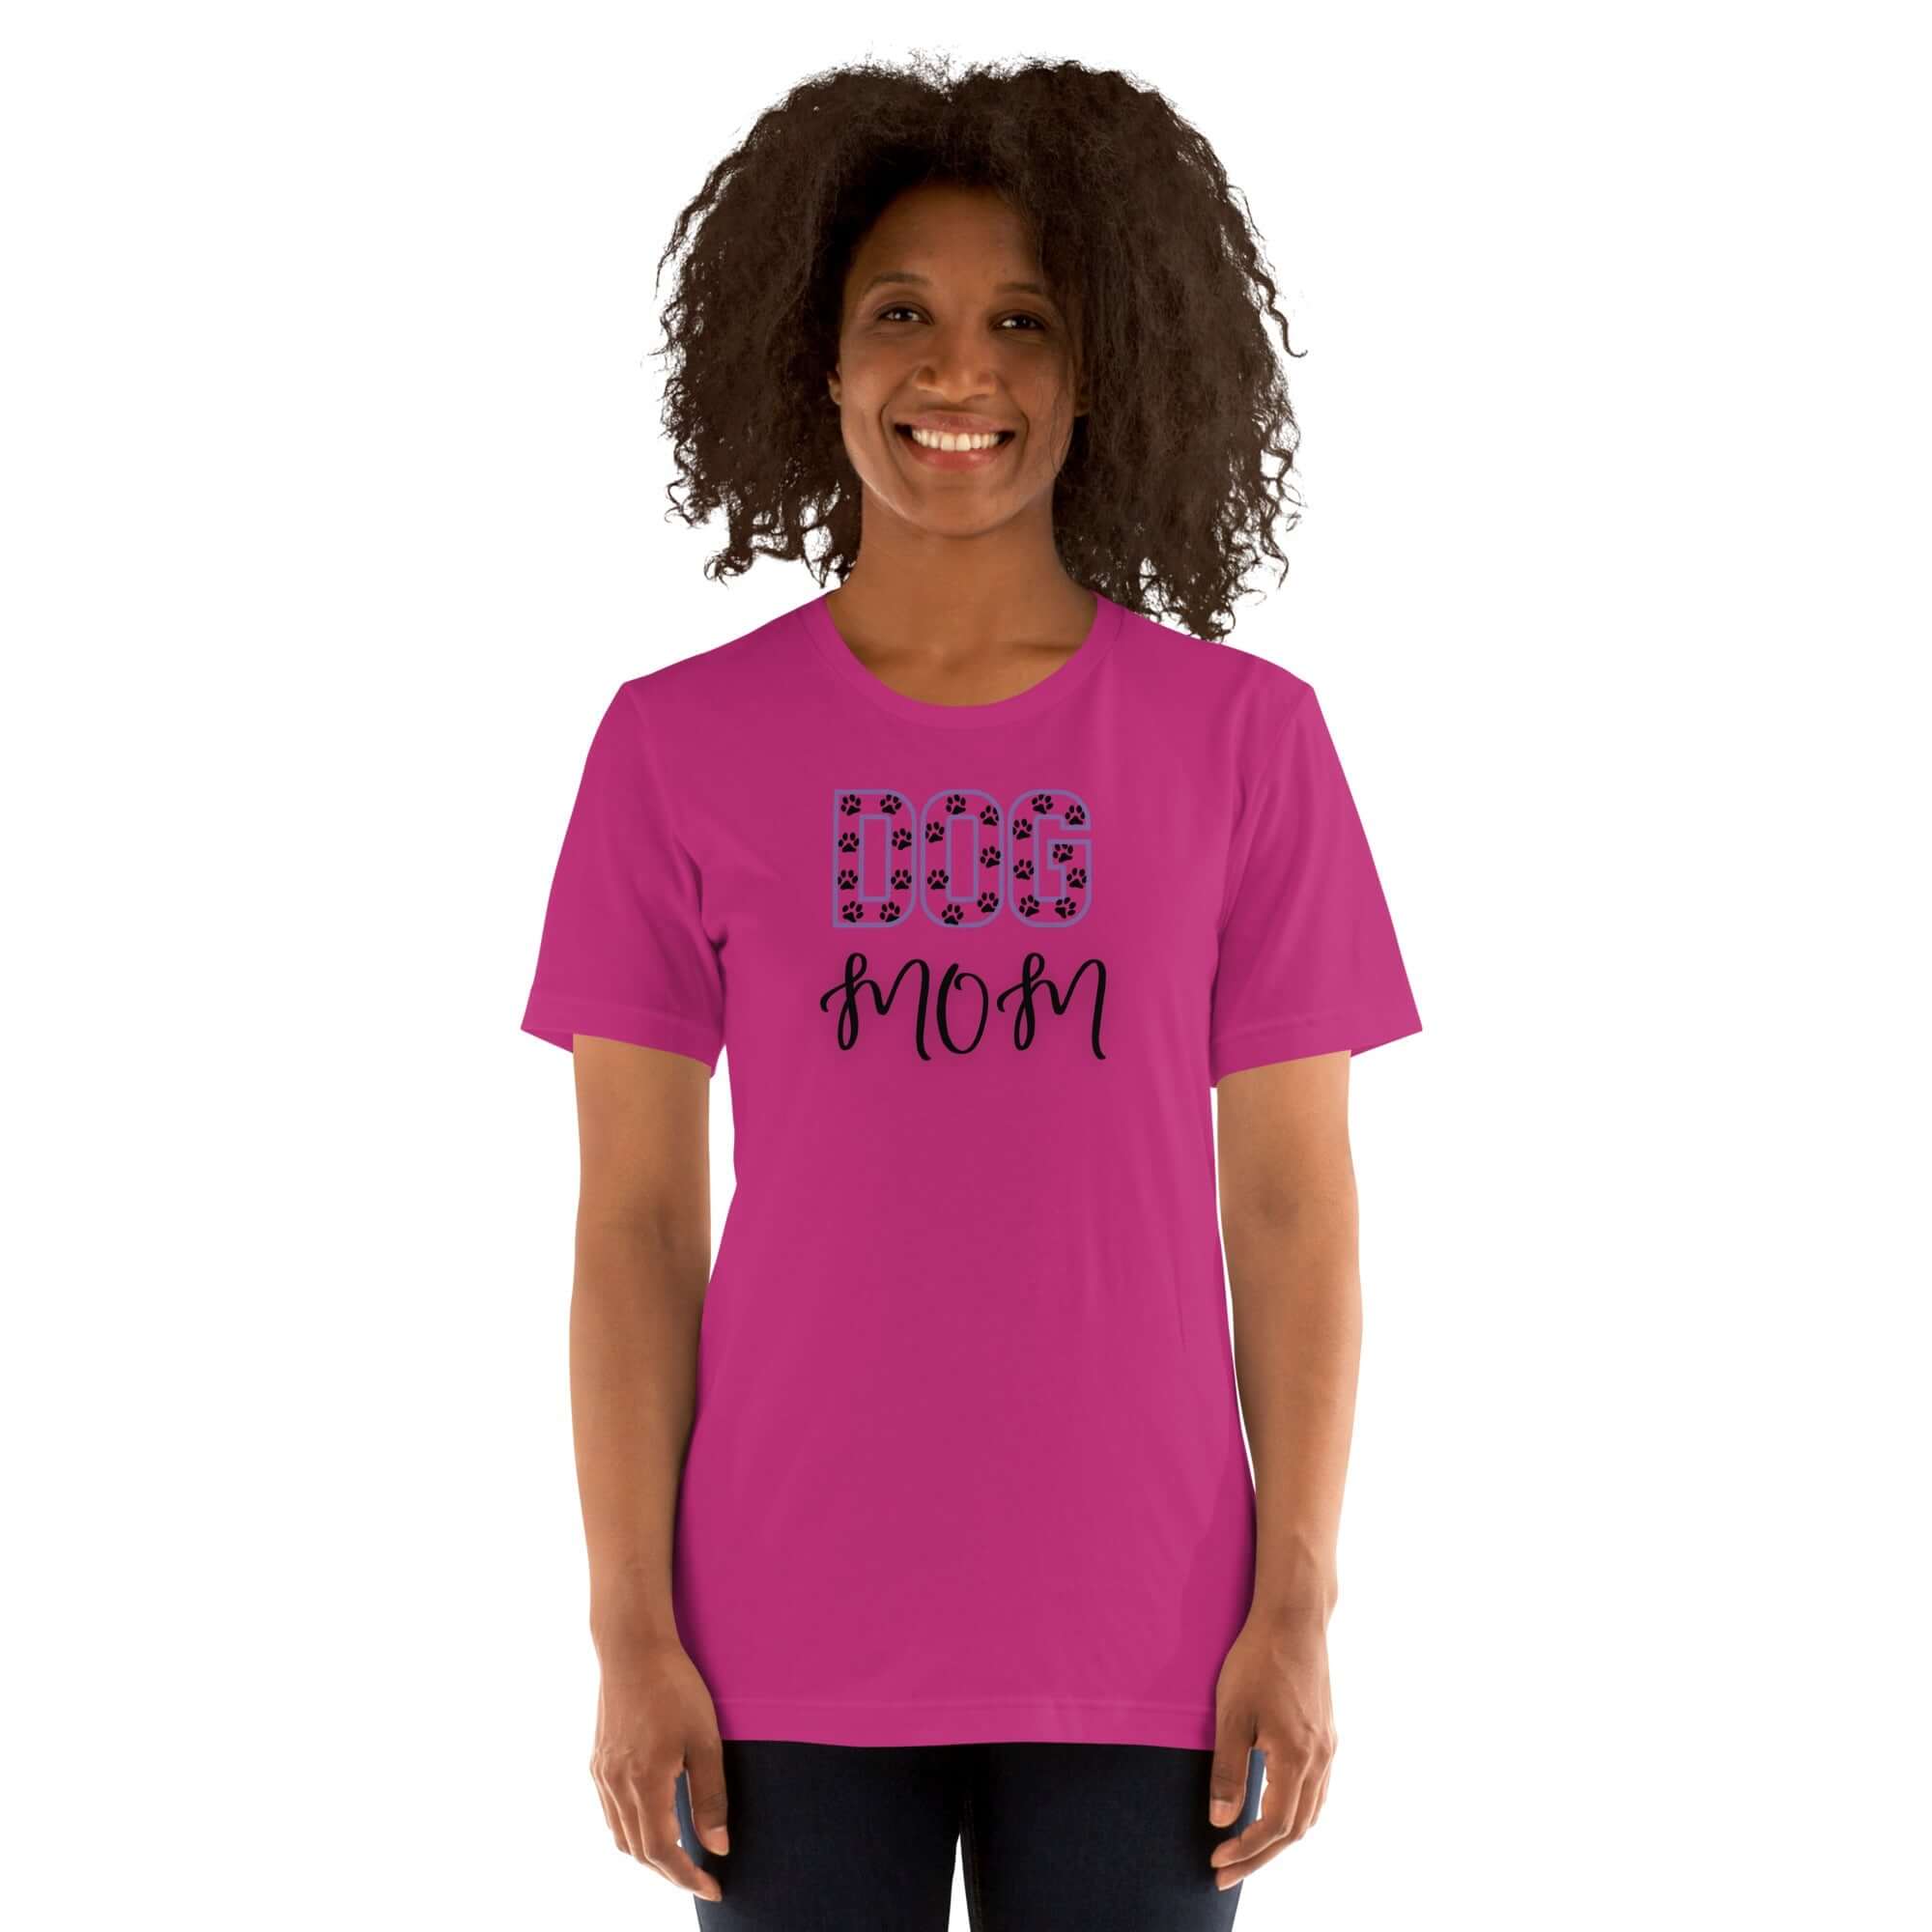 Paw Print Dog Mom T-Shirt - TAILWAGS UNLIMITED